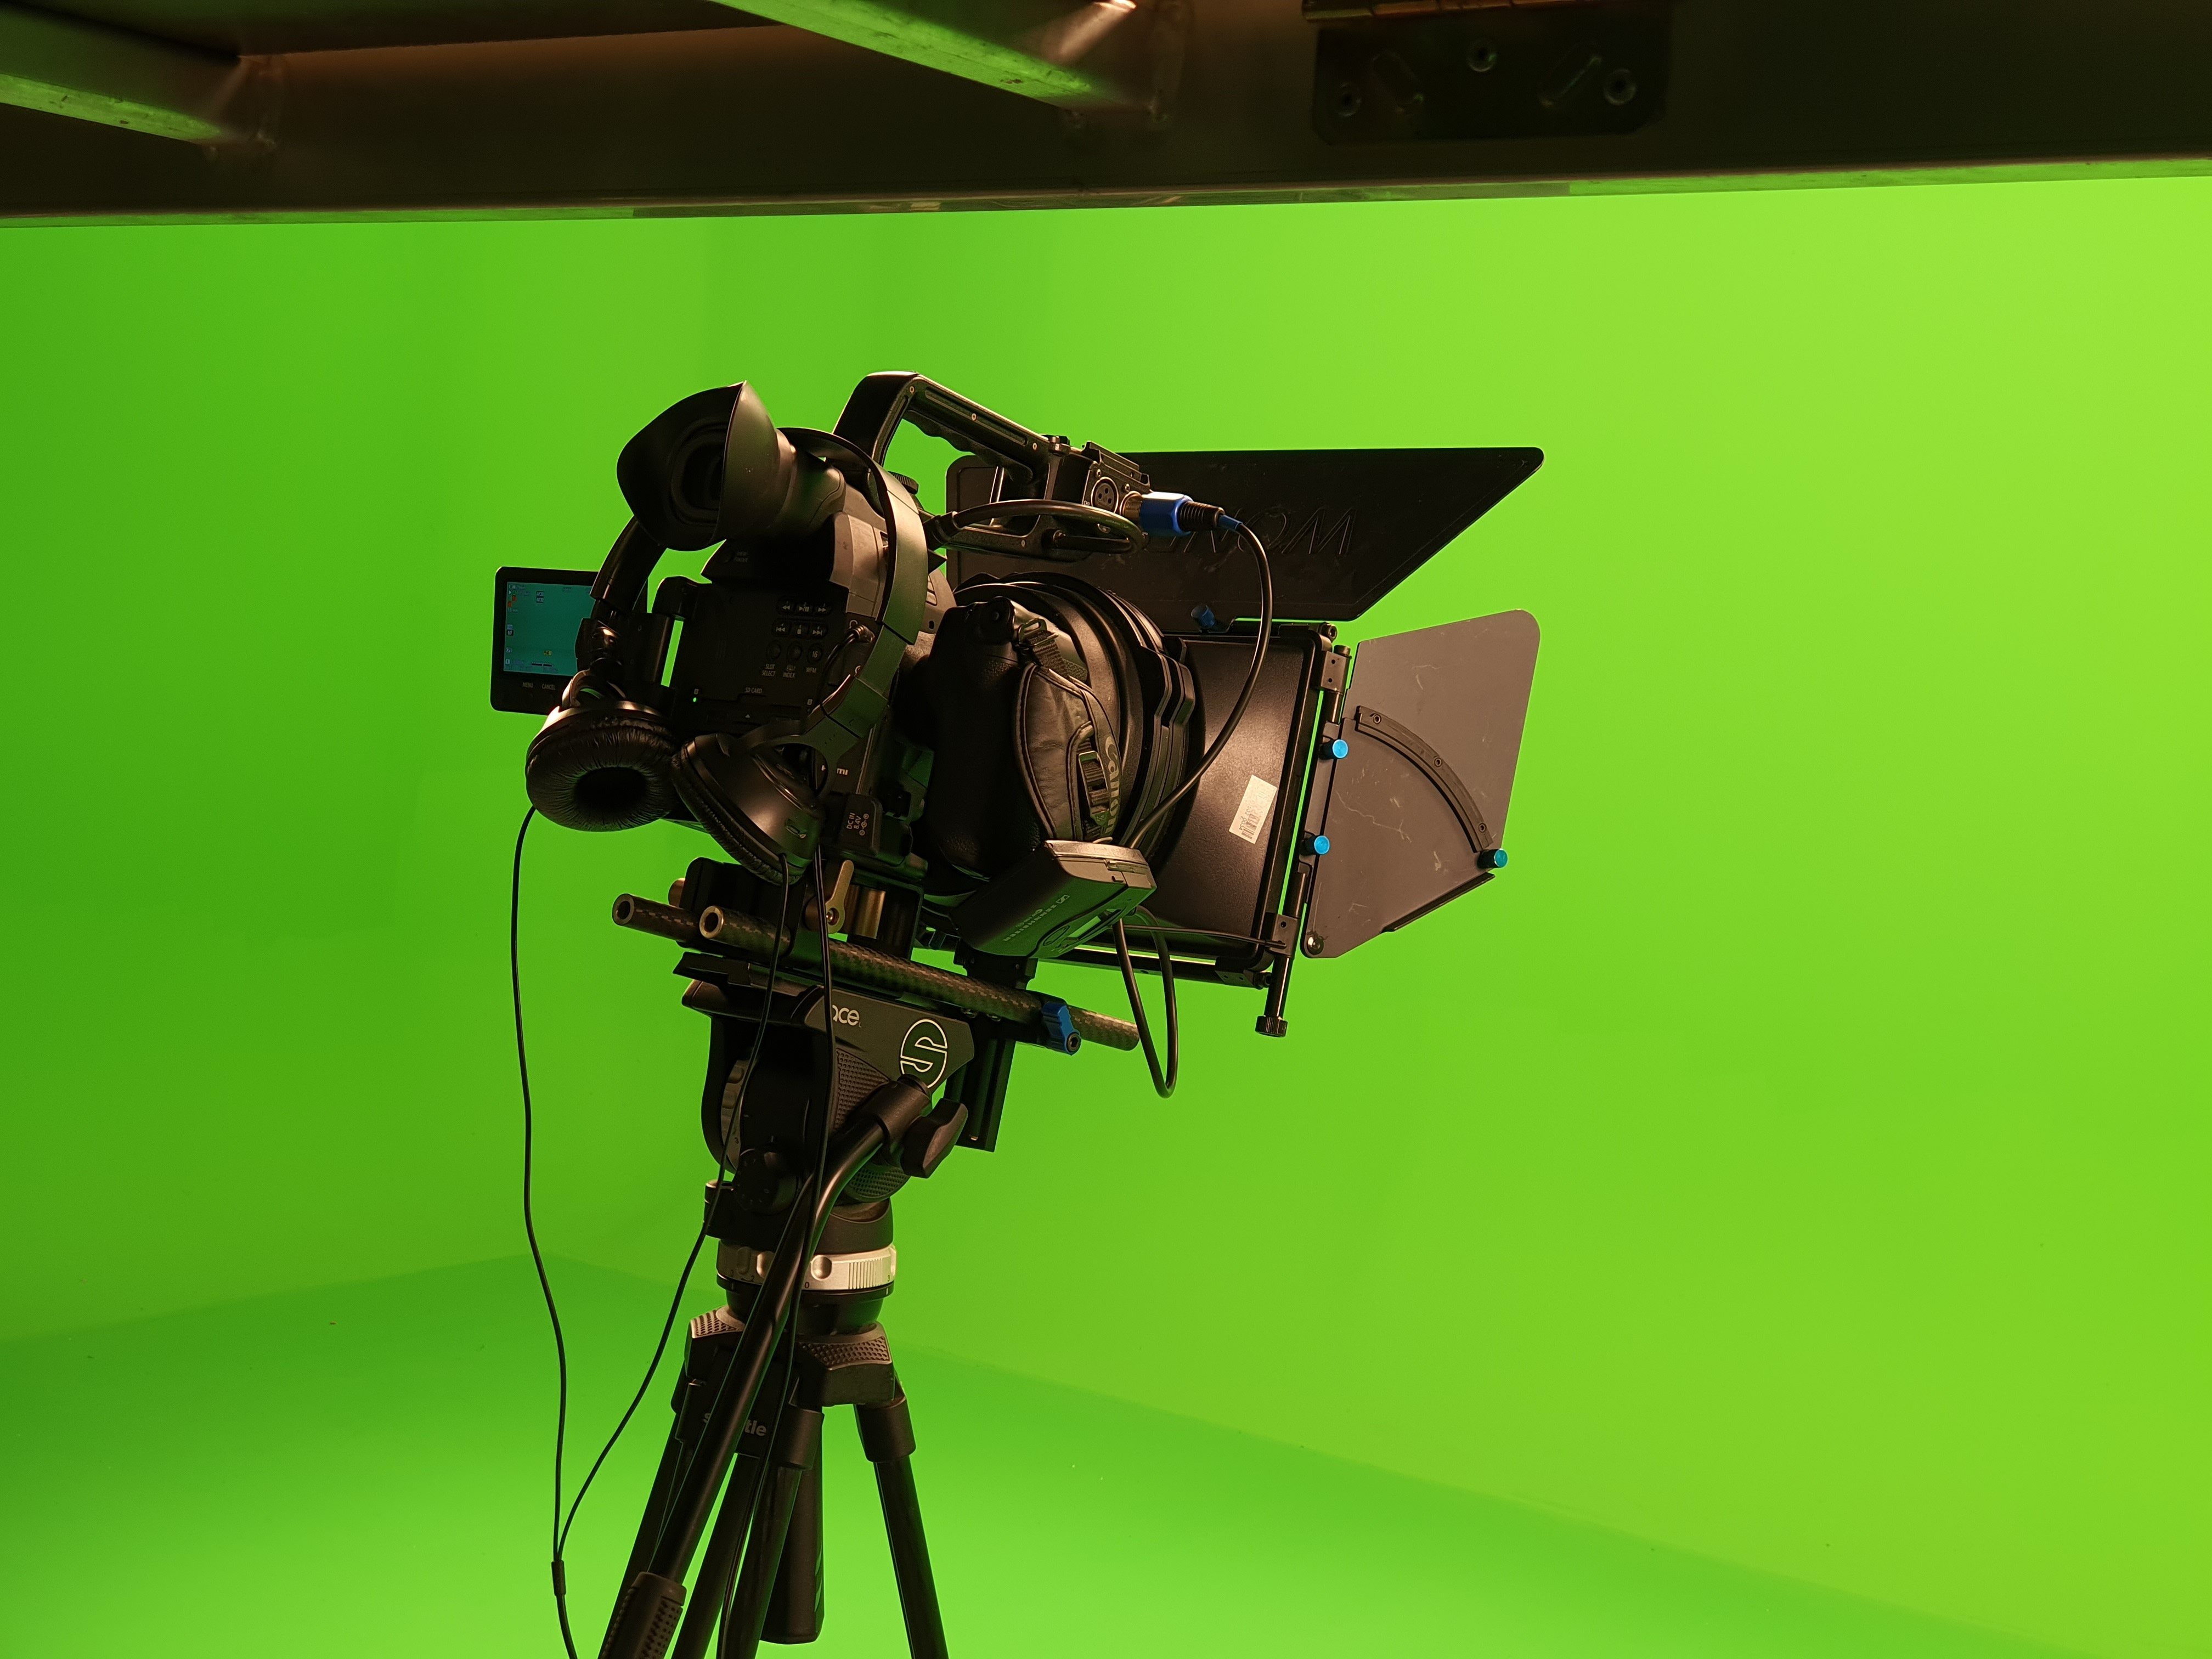 What Are The Benefits Of Using A Green Screen?